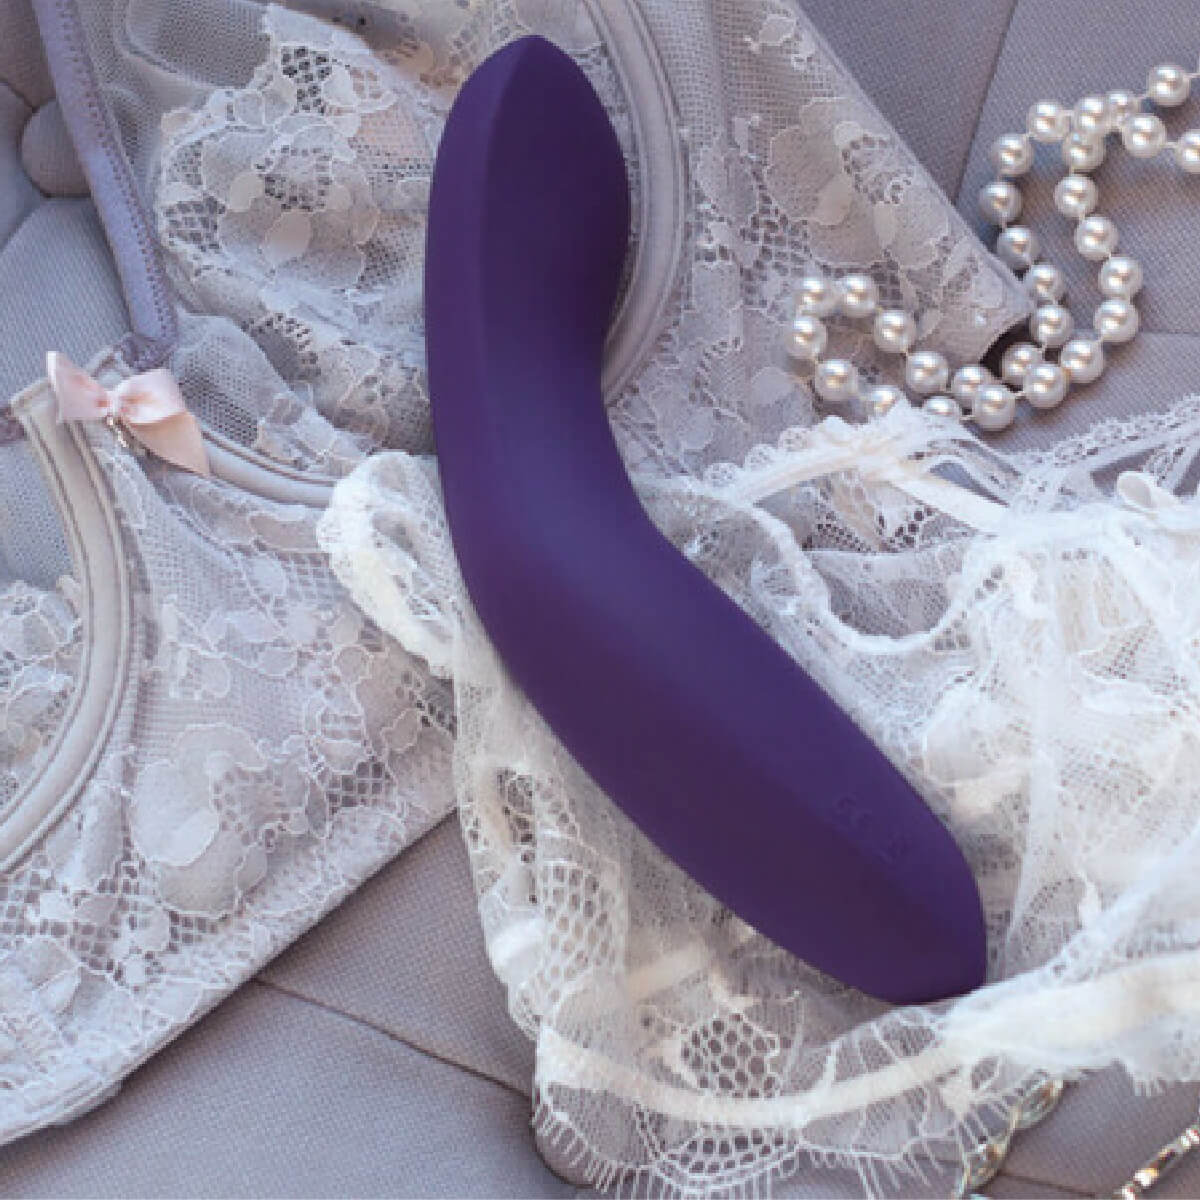 The satisfying G-Spot pleasure vibrator Rave by We-Vibe - Product image